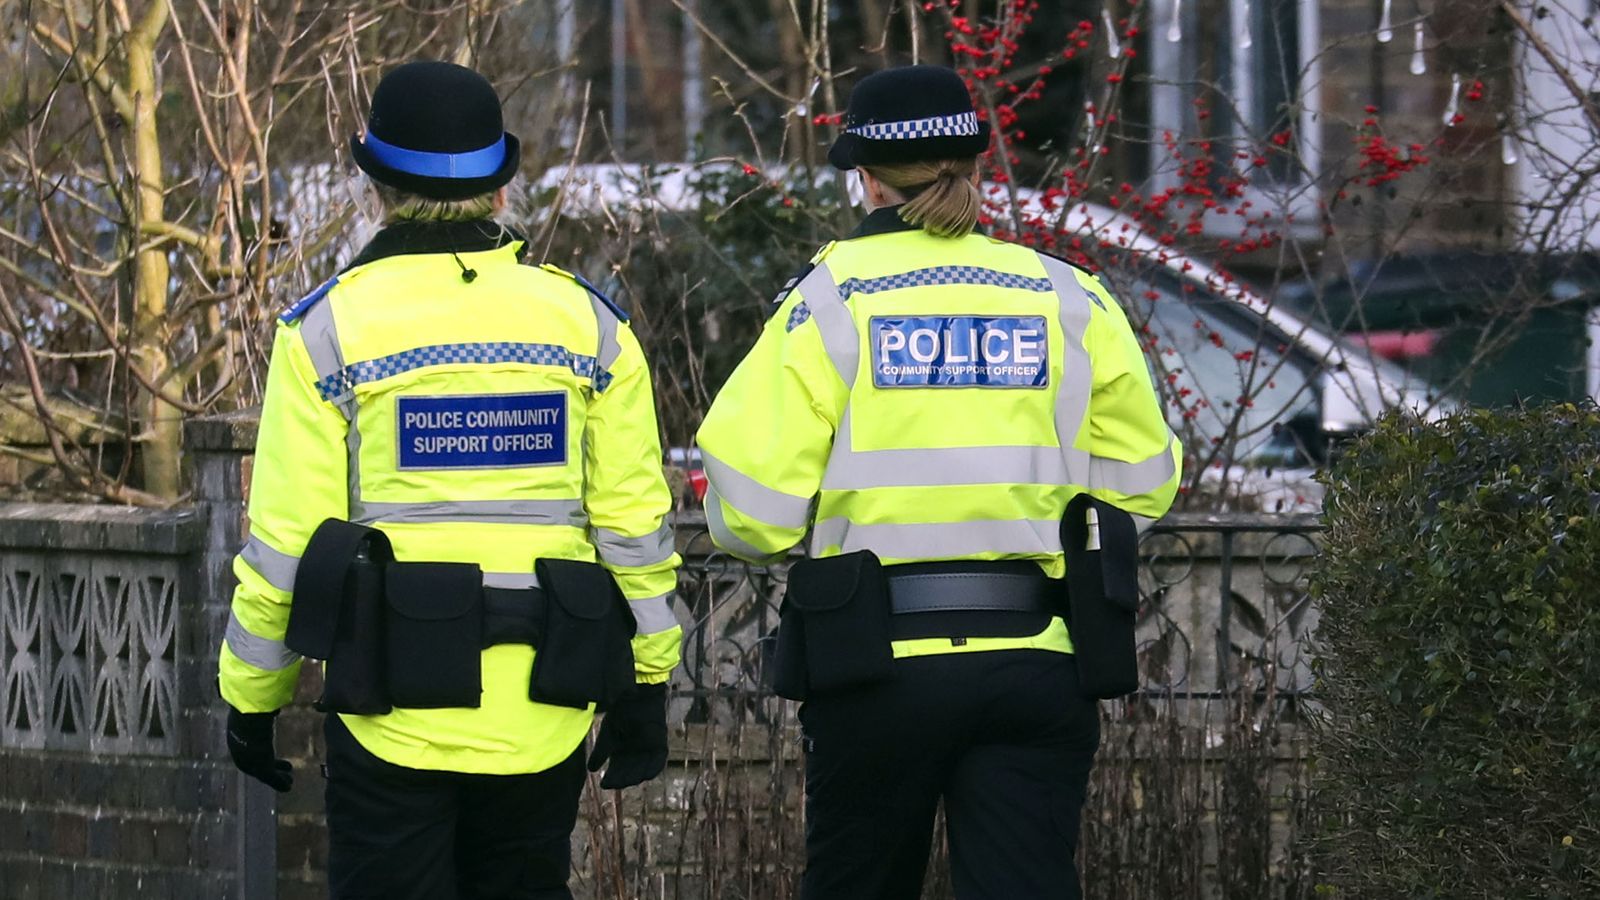 Labour pushes for increase to neighbourhood policing as communities face '3,000 anti-social incidents a day'